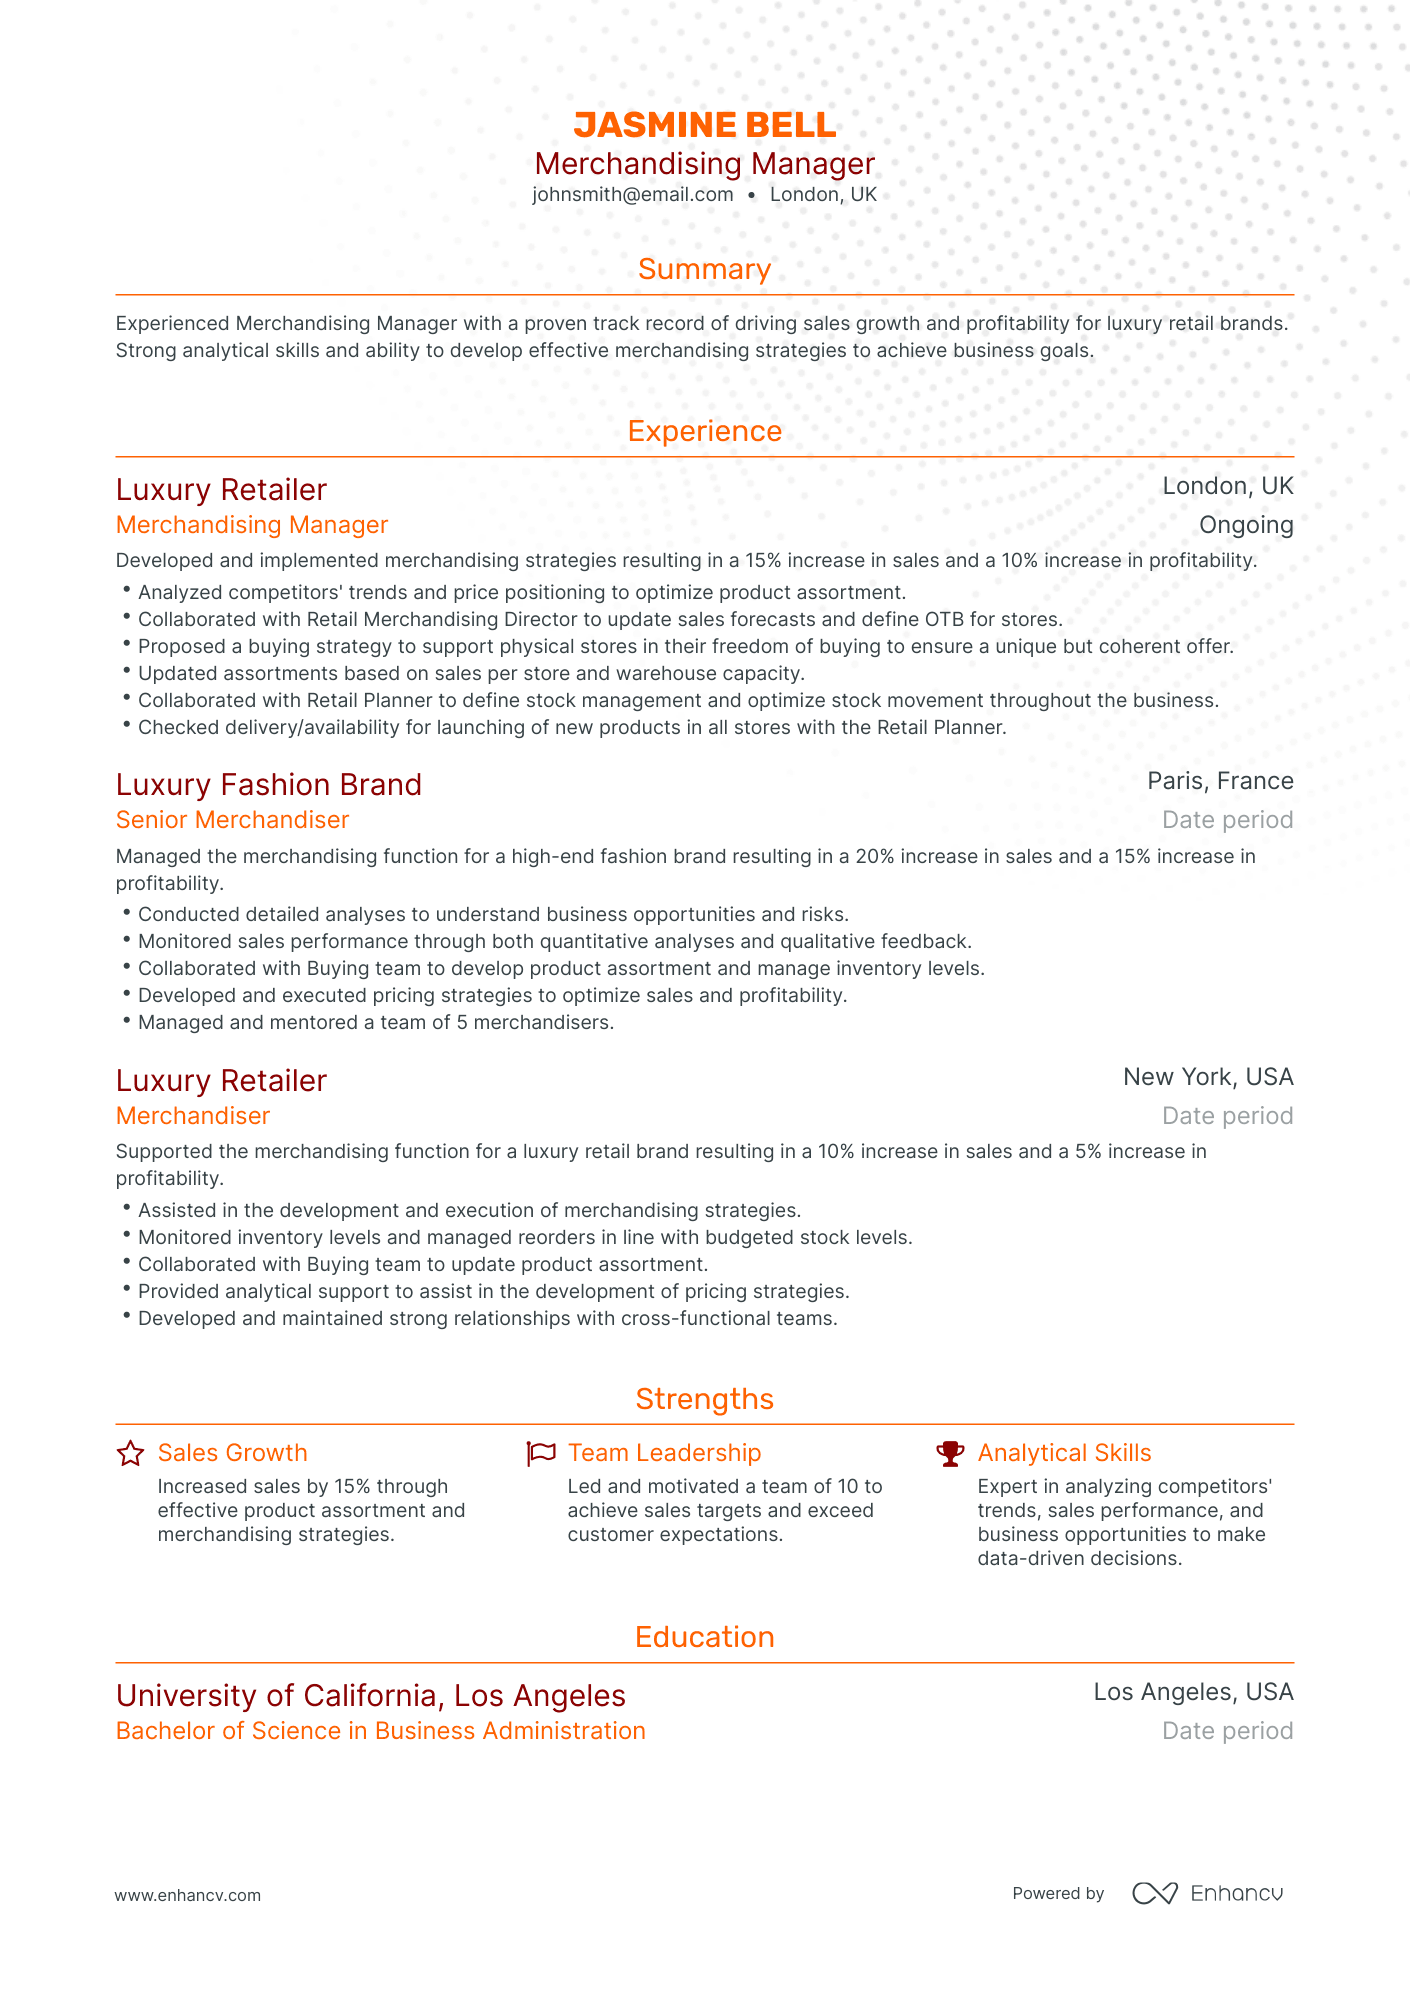 Traditional Merchandising Manager Resume Template